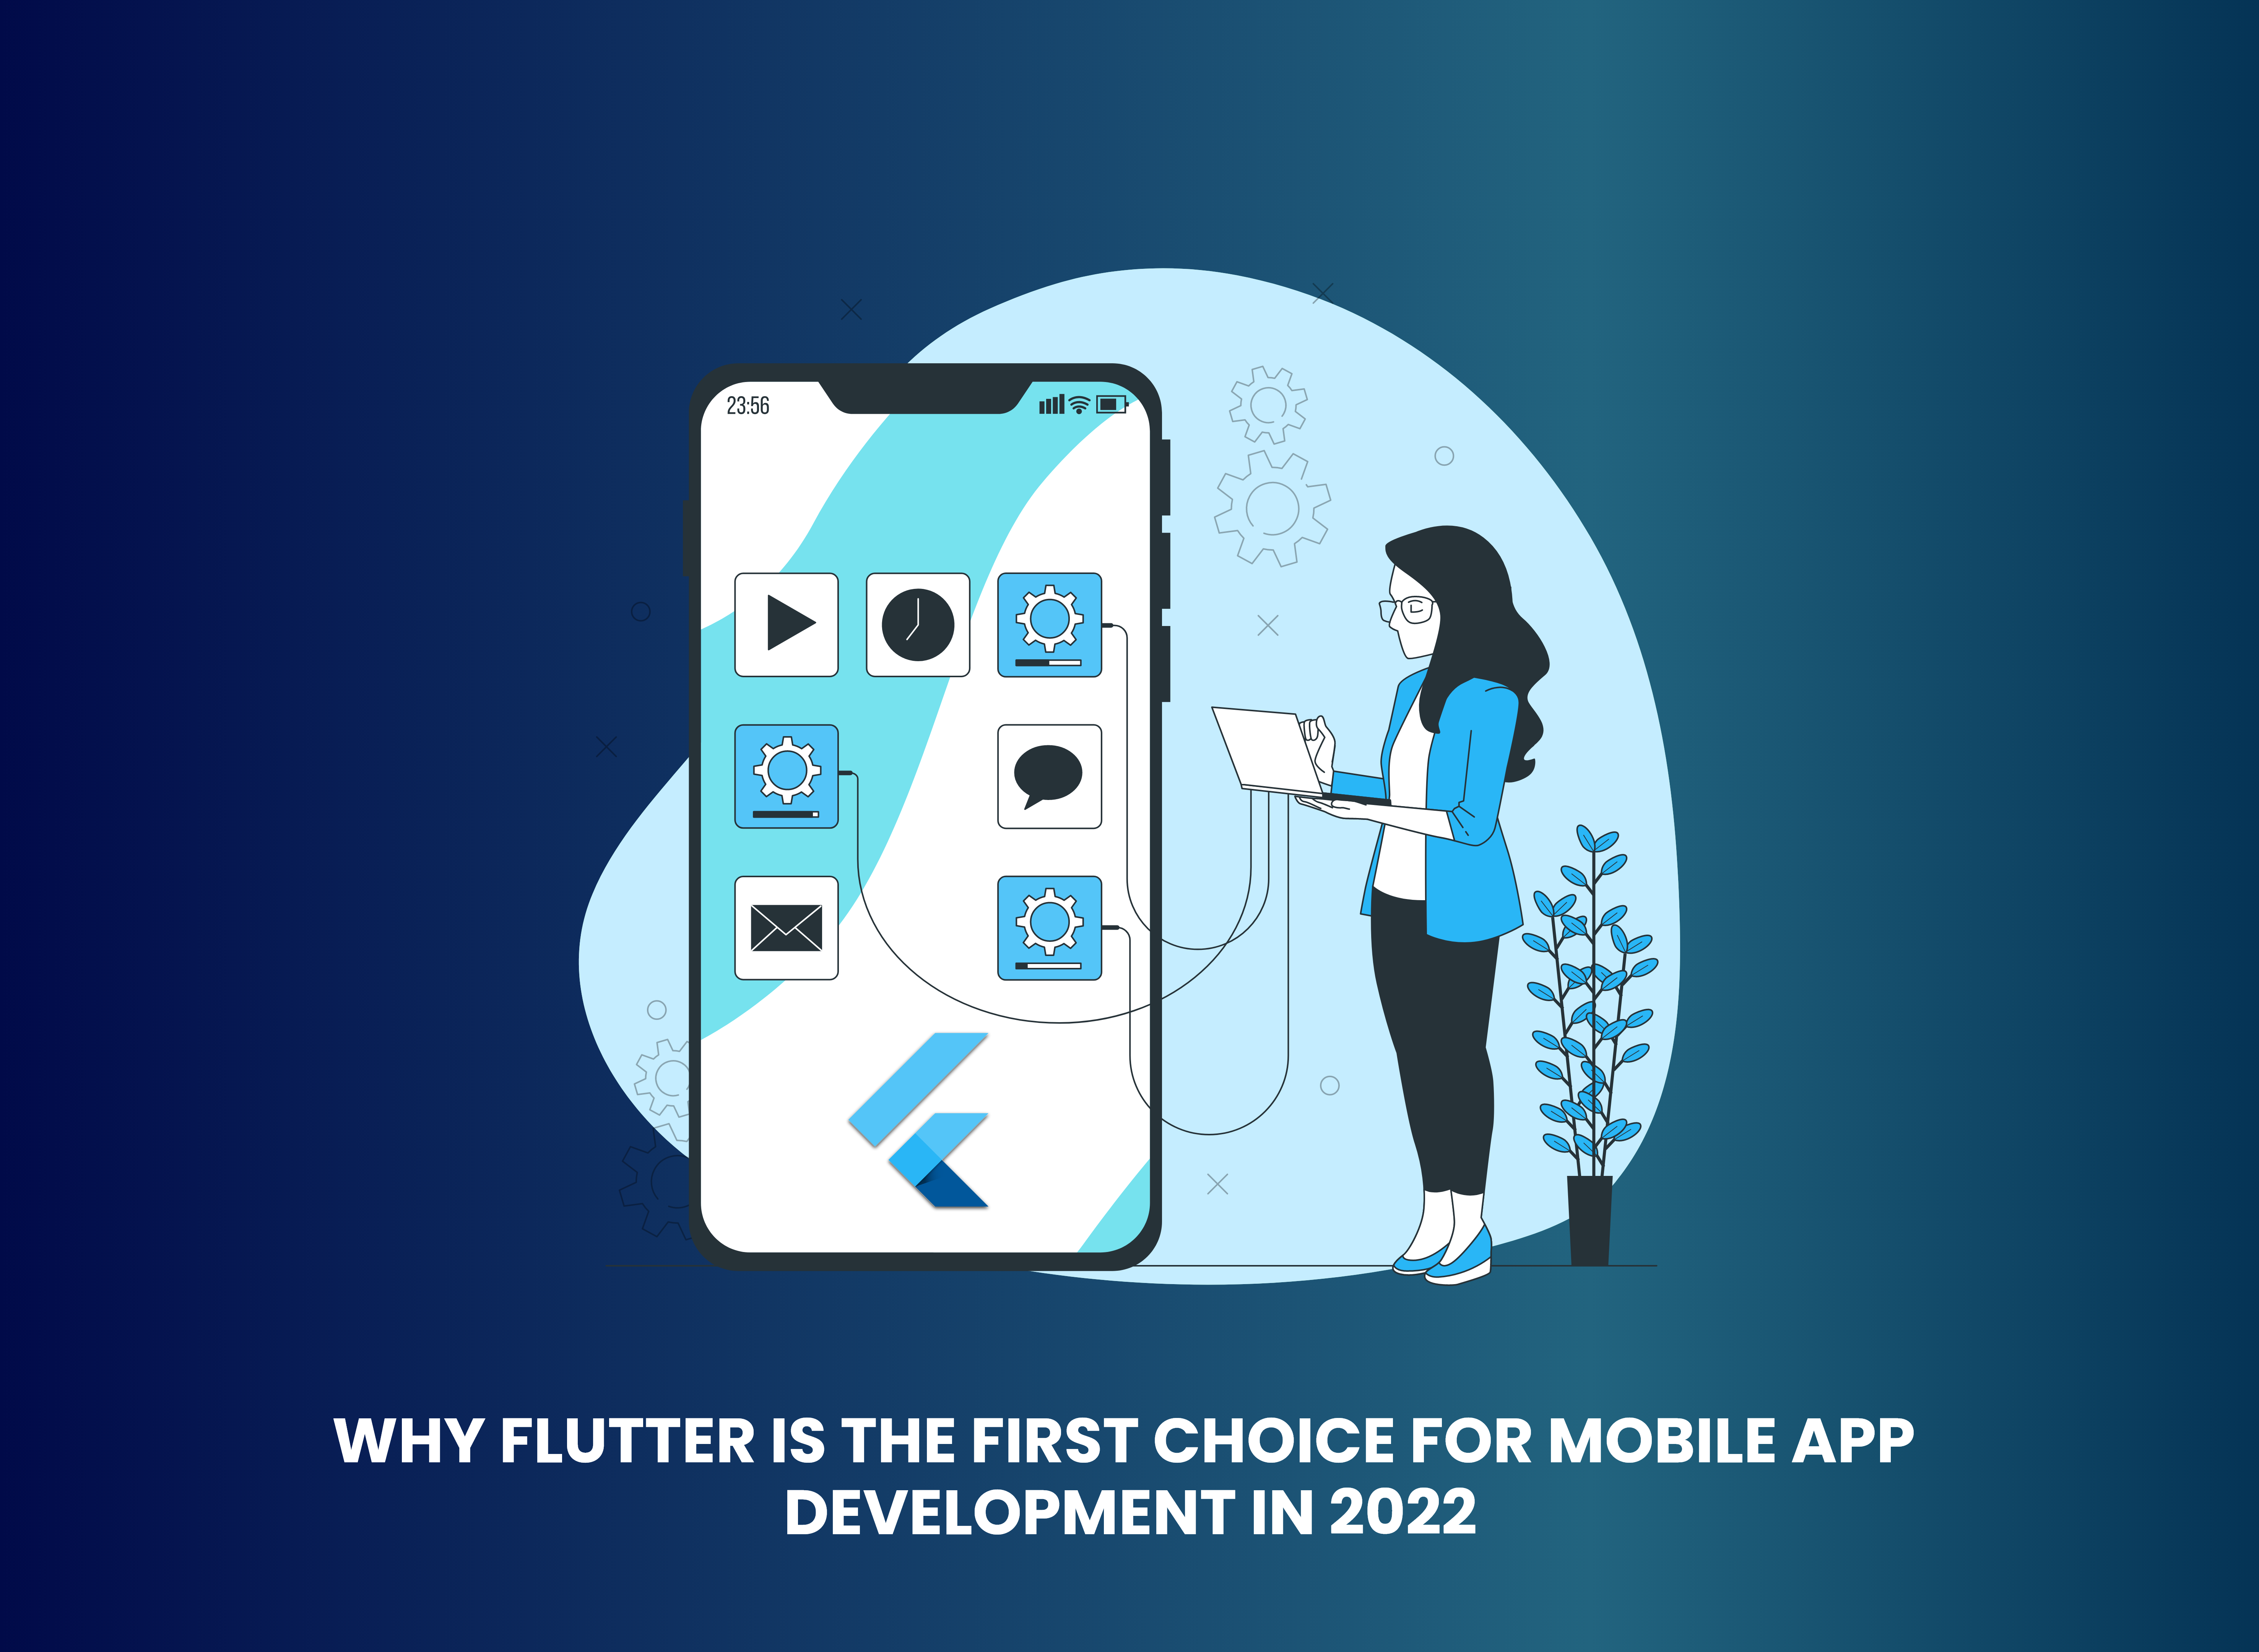 Why flutter is the first choice for mobile app development in 2022 